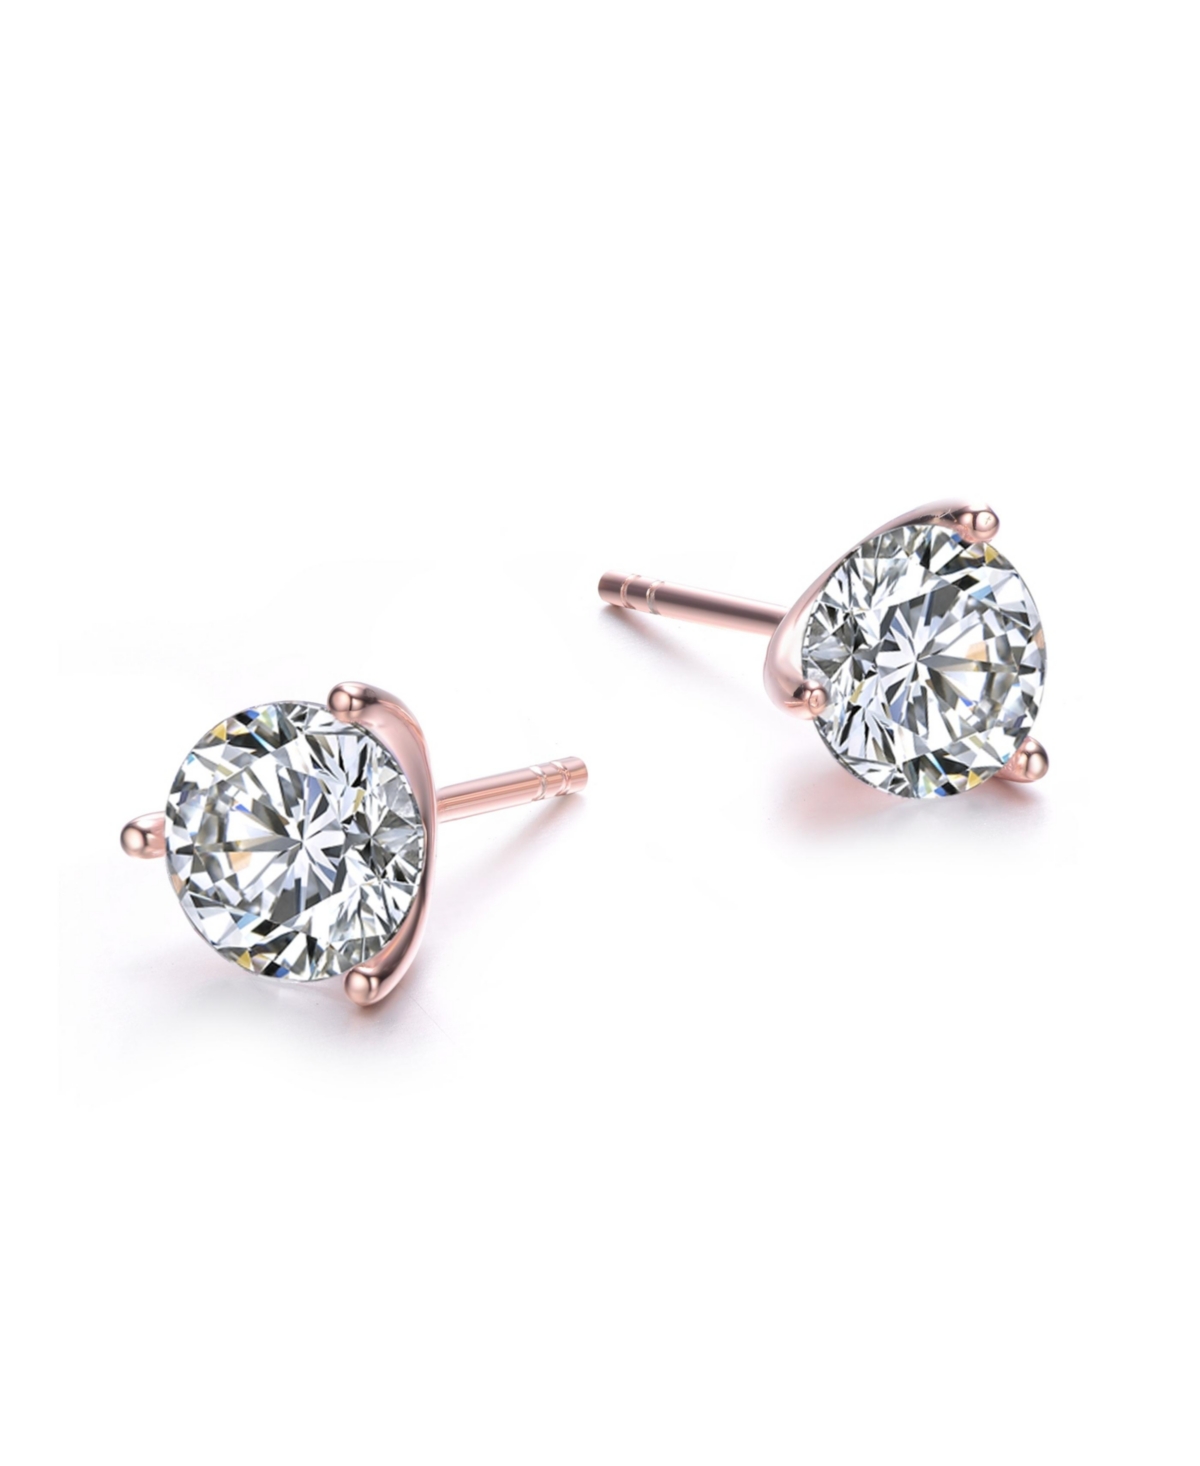 RACHEL GLAUBER WHITE GOLD PLATED 3-PRONG MARTINI SOLITAIRE STUD EARRINGS